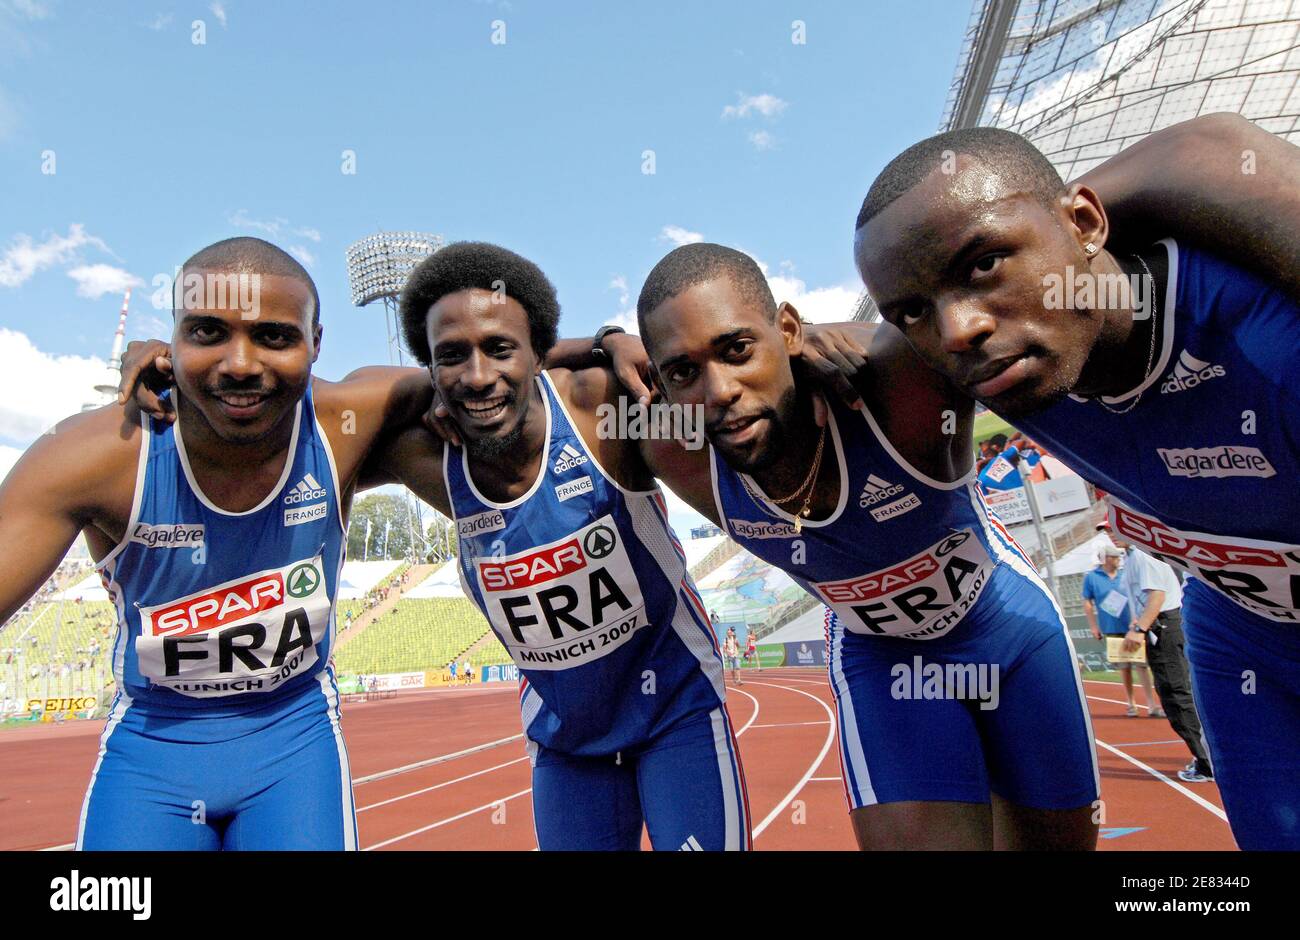 French Athlets (From L to R) Eddy Delepine, Issa Aime N'Thepee, David Alerte and Martial Mbandjock pose at the end of the men's 4x100 meters relay during the Spar European Cup in athletics, in Munich, Germany, on June 23, 2007. Photo by Christophe Guibbaud/Cameleon/ABACAPRESS.COM Stock Photo